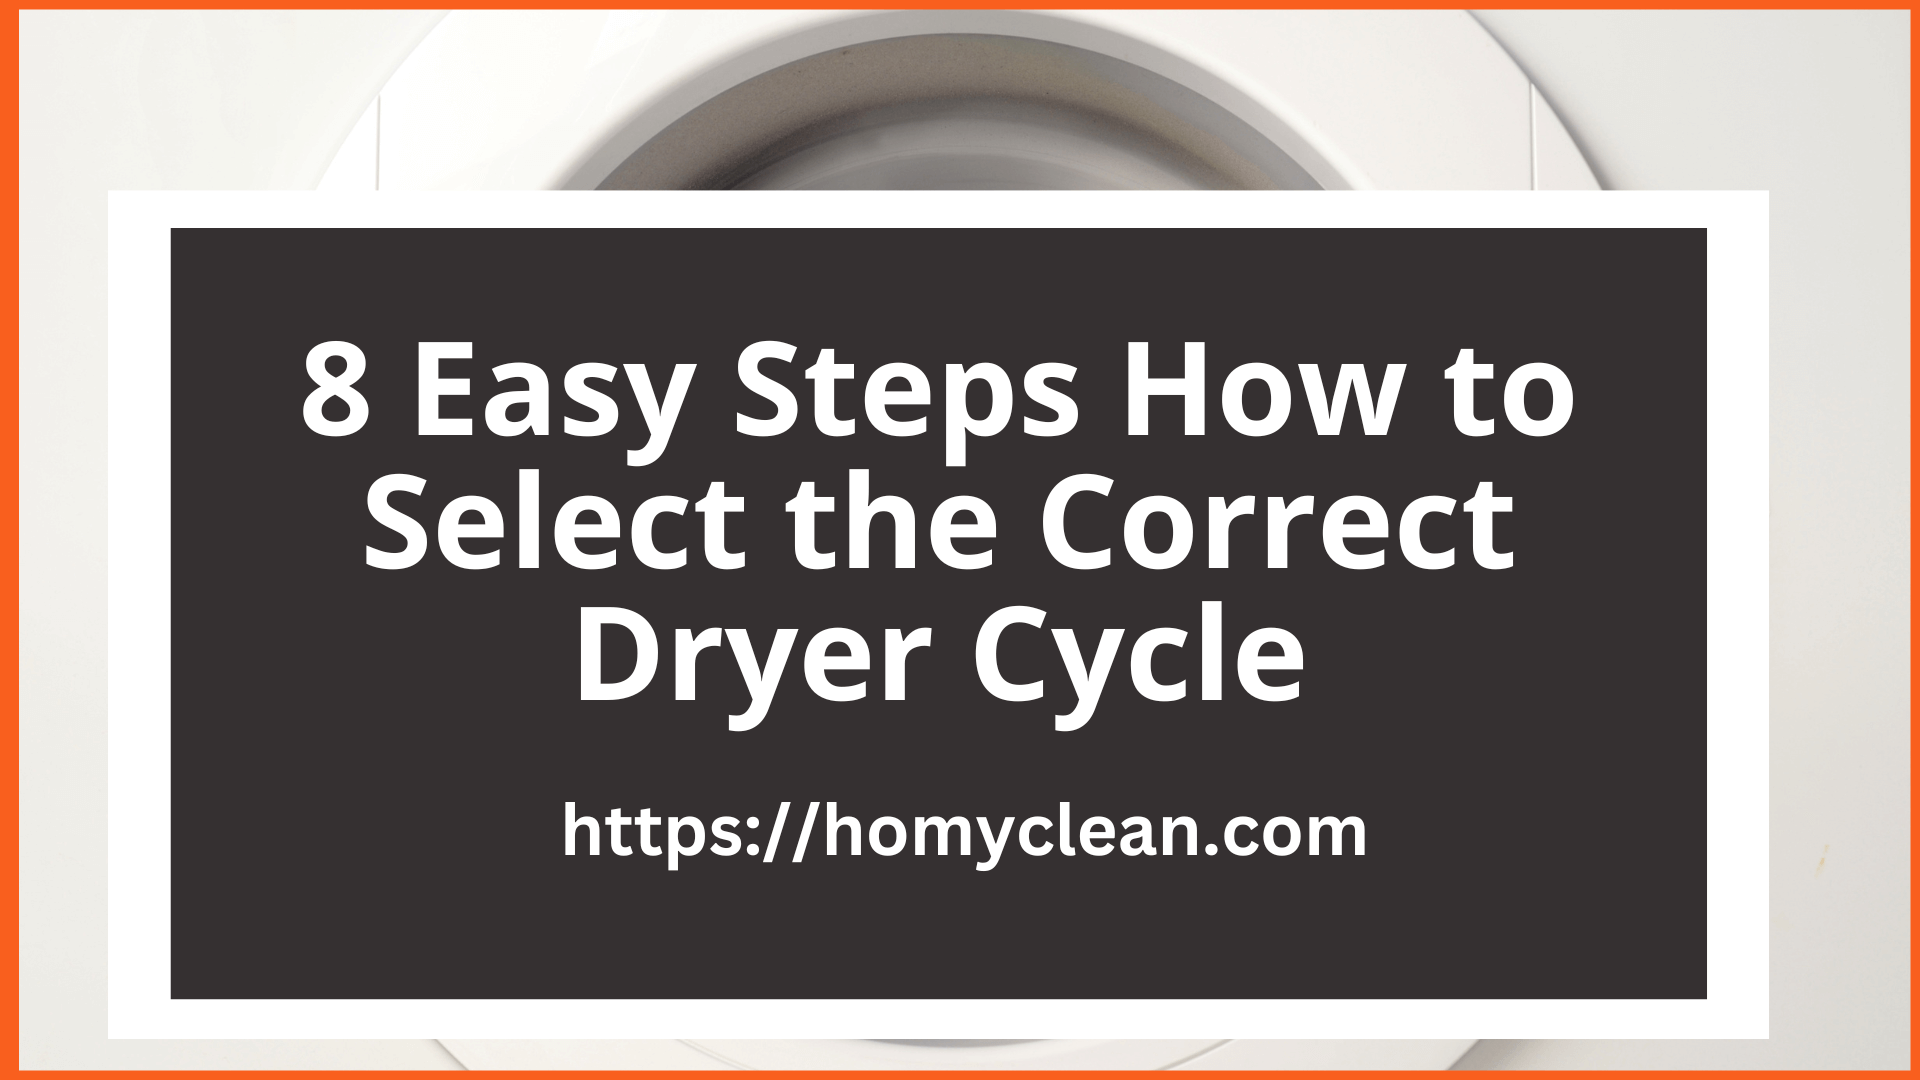 How to Select the Correct Dryer Cycle